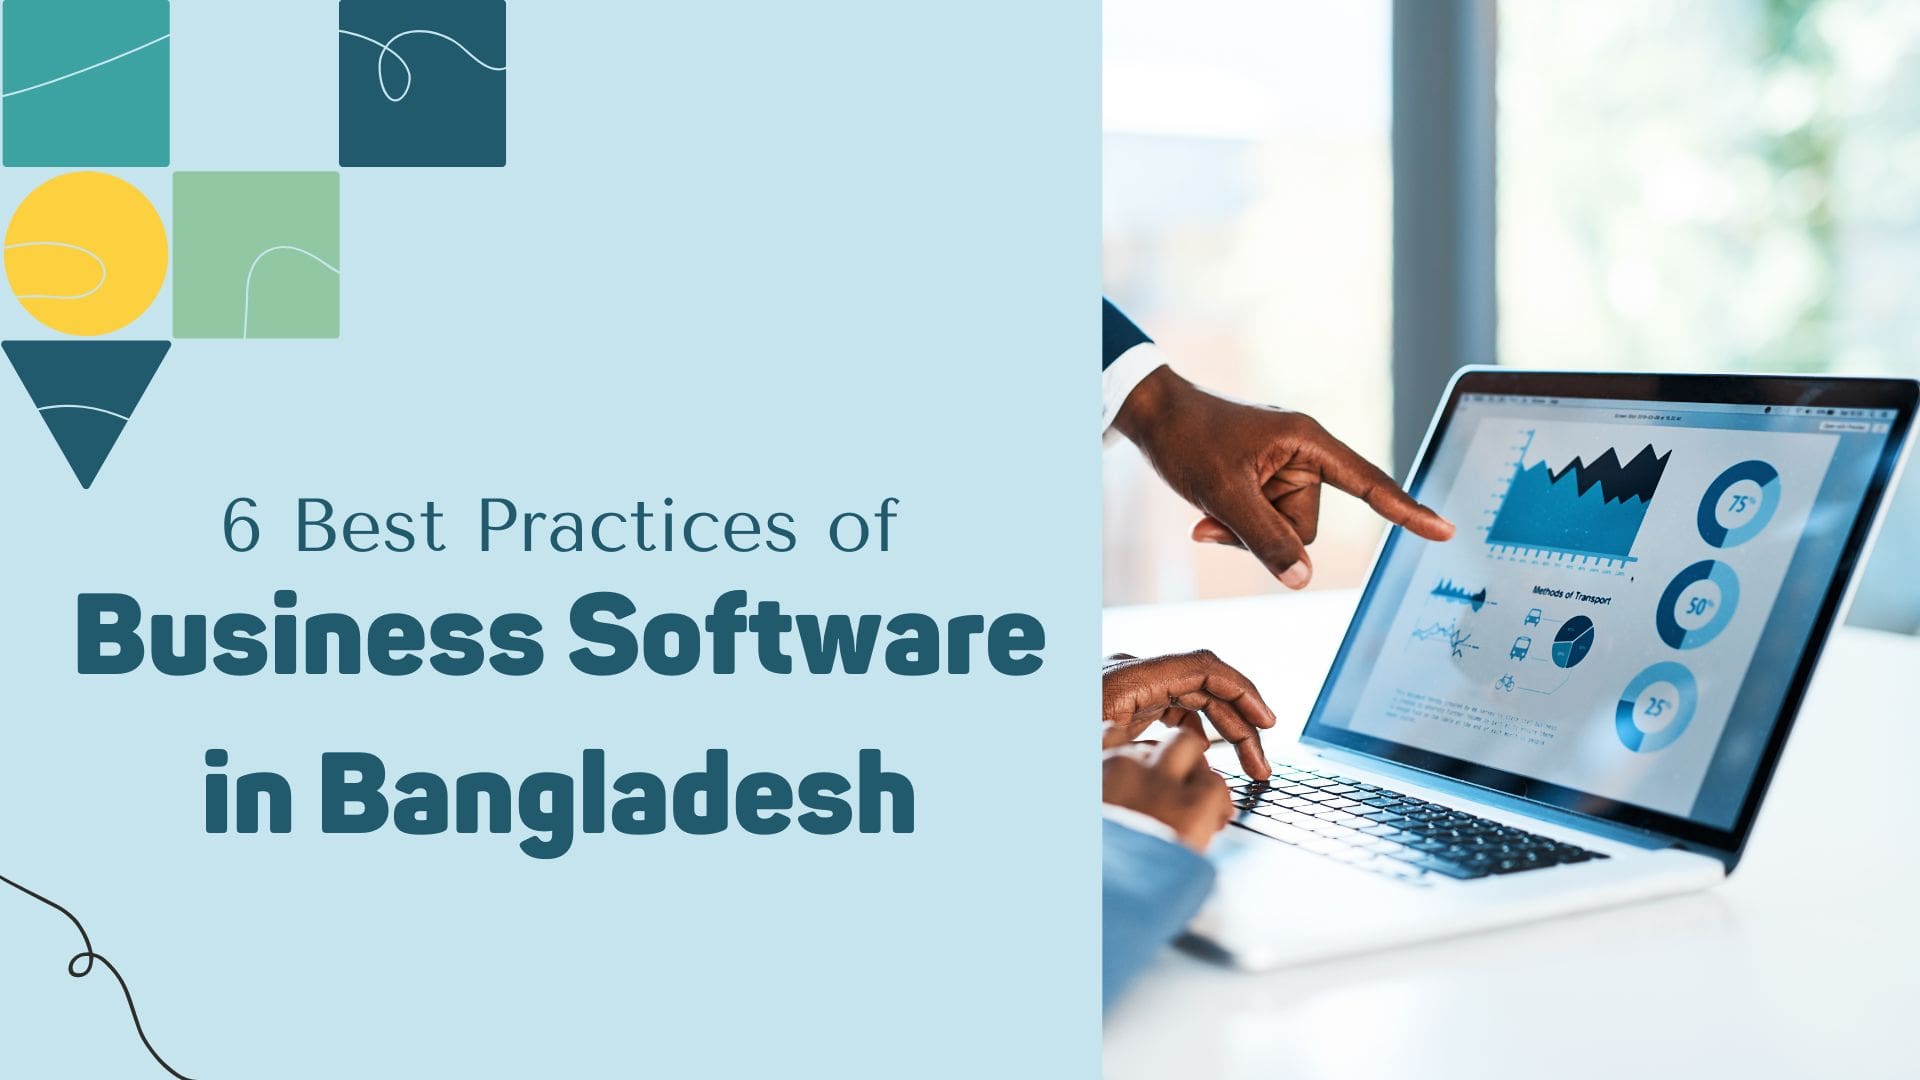 6 Best Practices of Business Software in Bangladesh